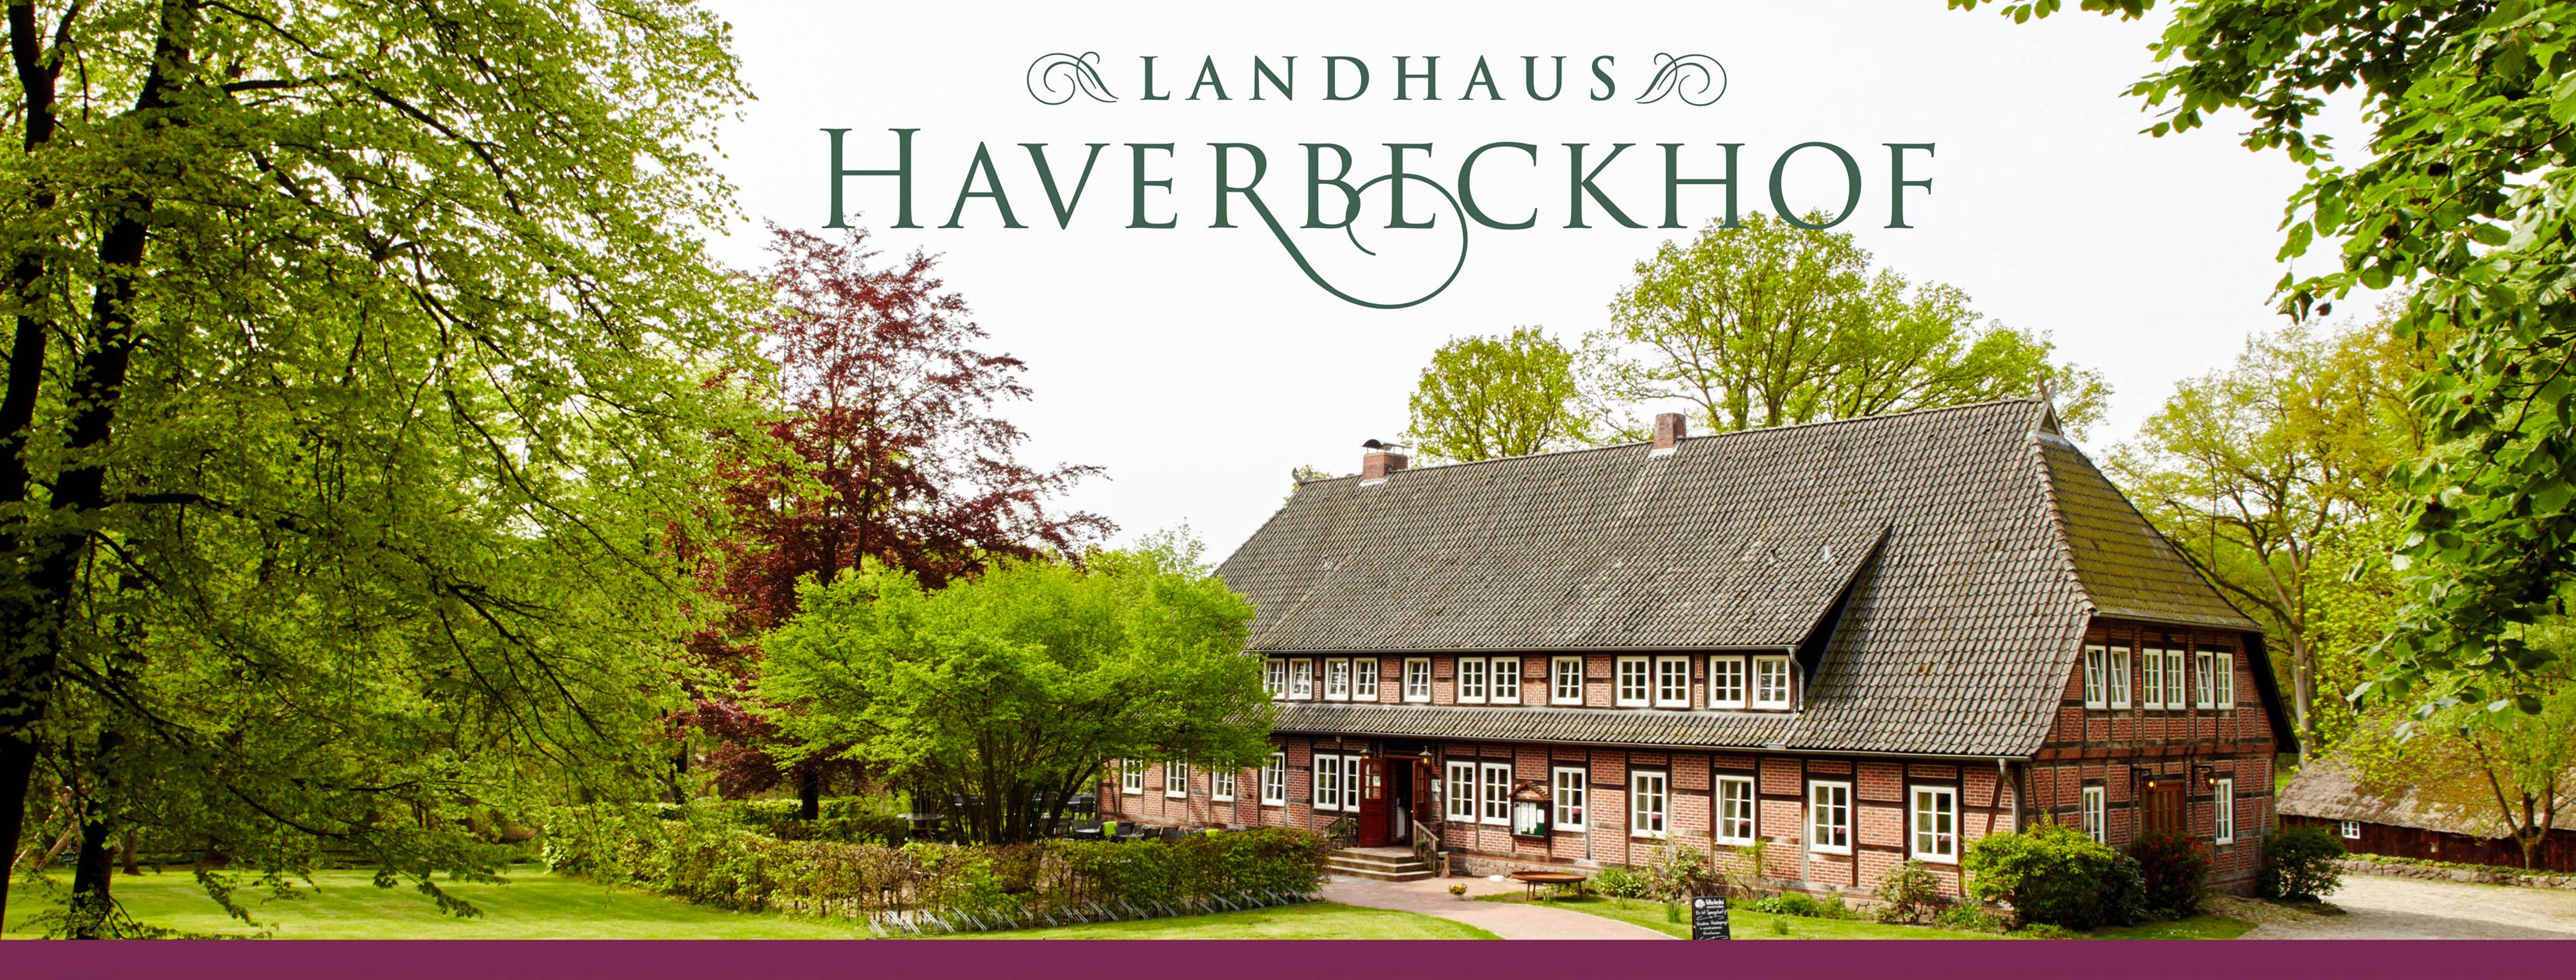 Landhaus Haverbeckhof <br/>90.00 ew <br/> <a href='http://vakantieoplossing.nl/outpage/?id=4f39fddf3578ccfc40ceb6b27acc70aa' target='_blank'>View Details</a>